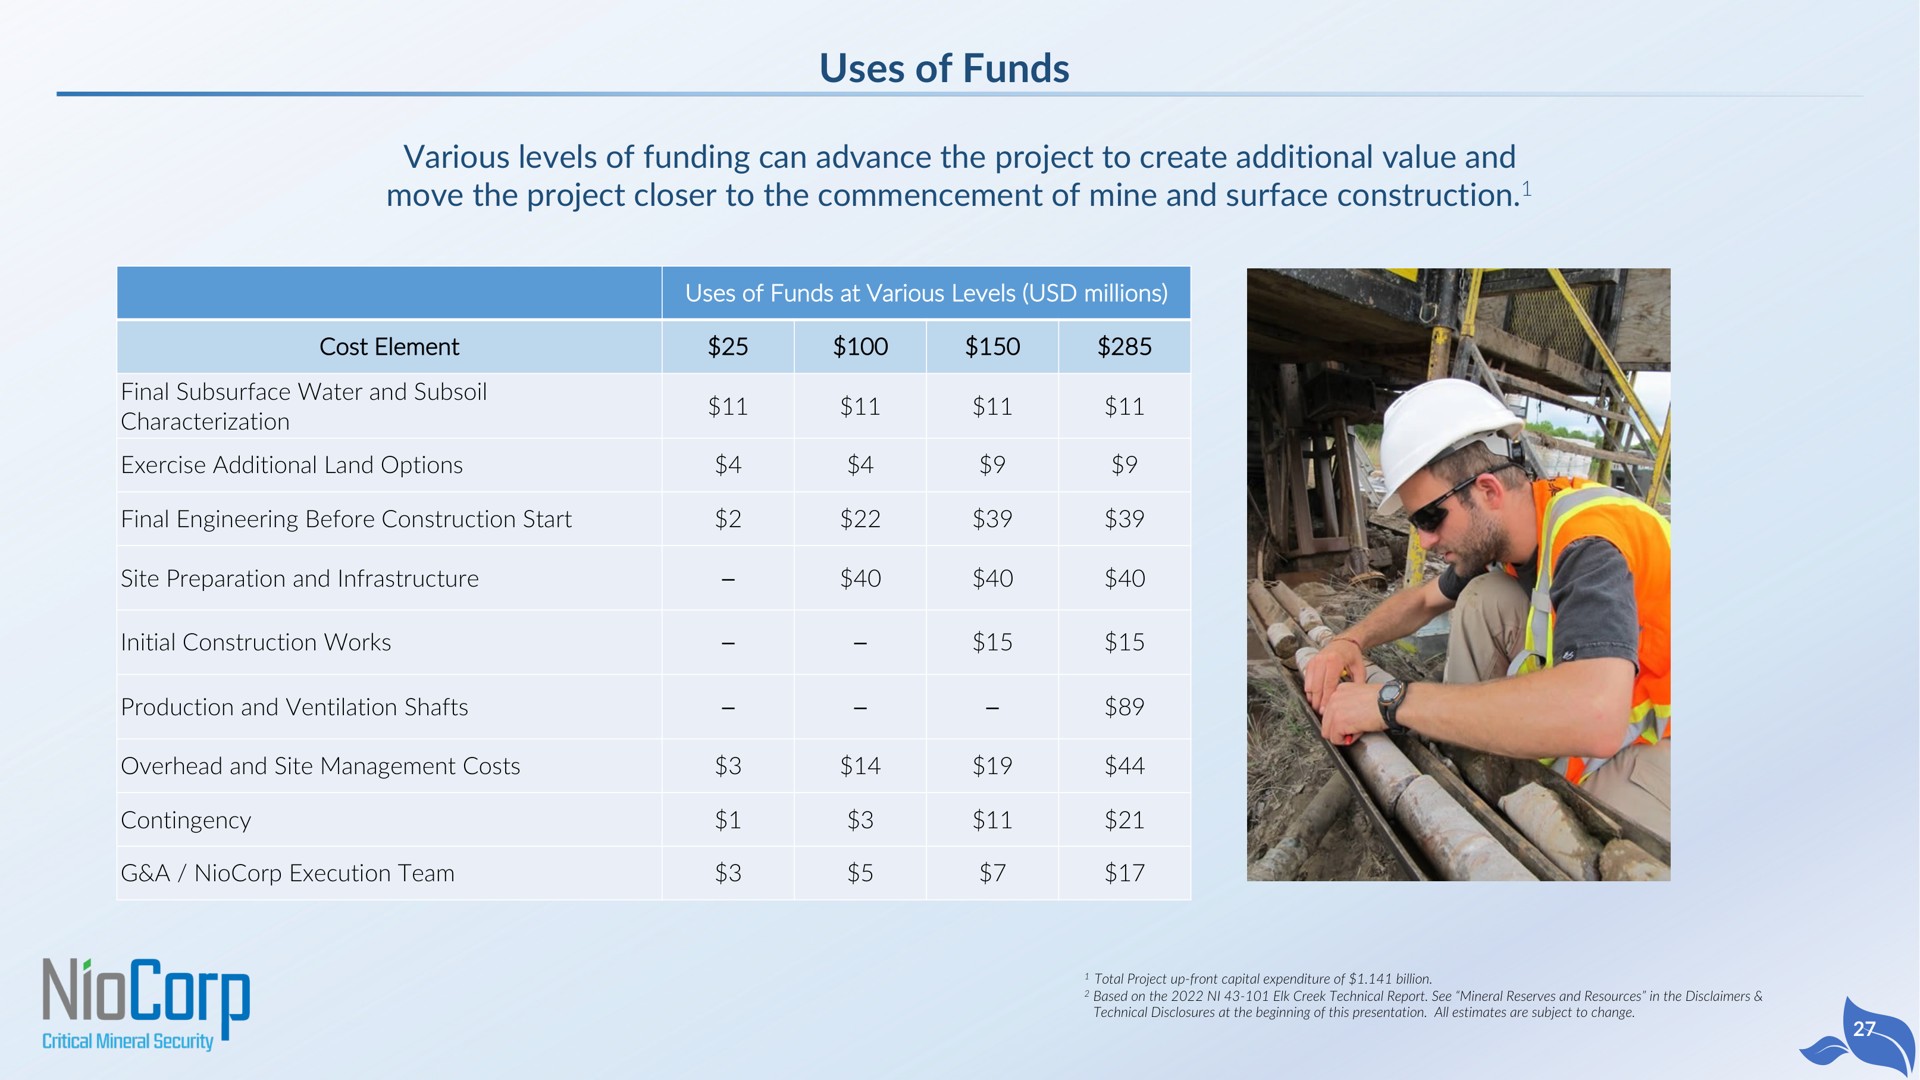 uses of funds various levels of funding can advance the project to create additional value and move the project closer to the commencement of mine and surface construction | NioCorp